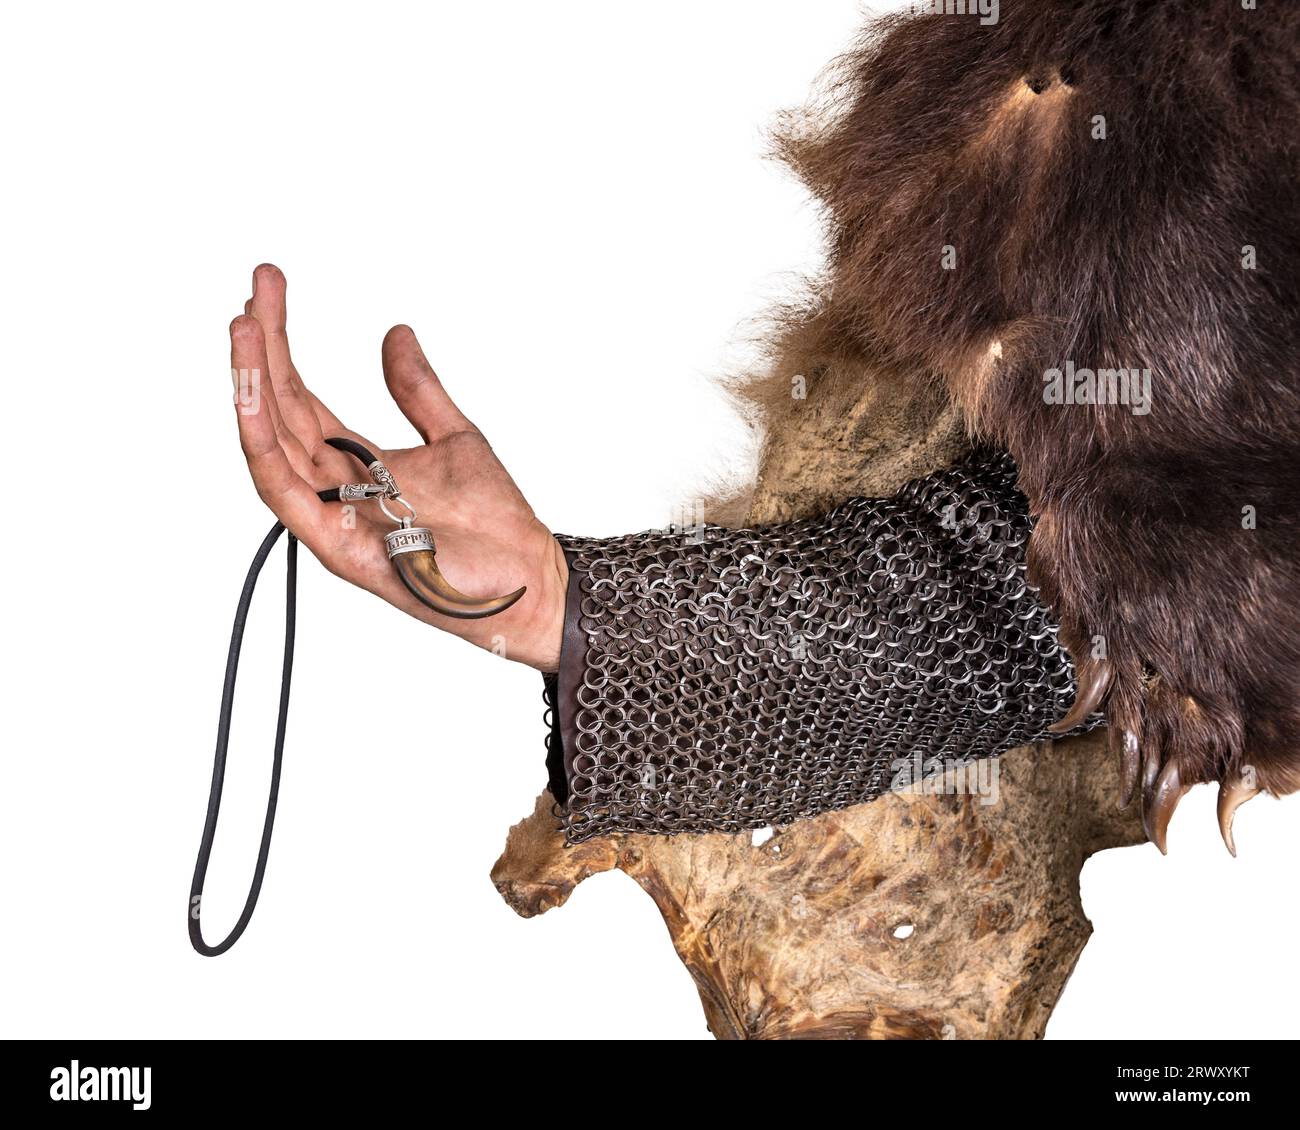 Hand Scandinavian warrior in a bearskin, with a decoration in the form of a bear tooth. Isolated on white Stock Photo